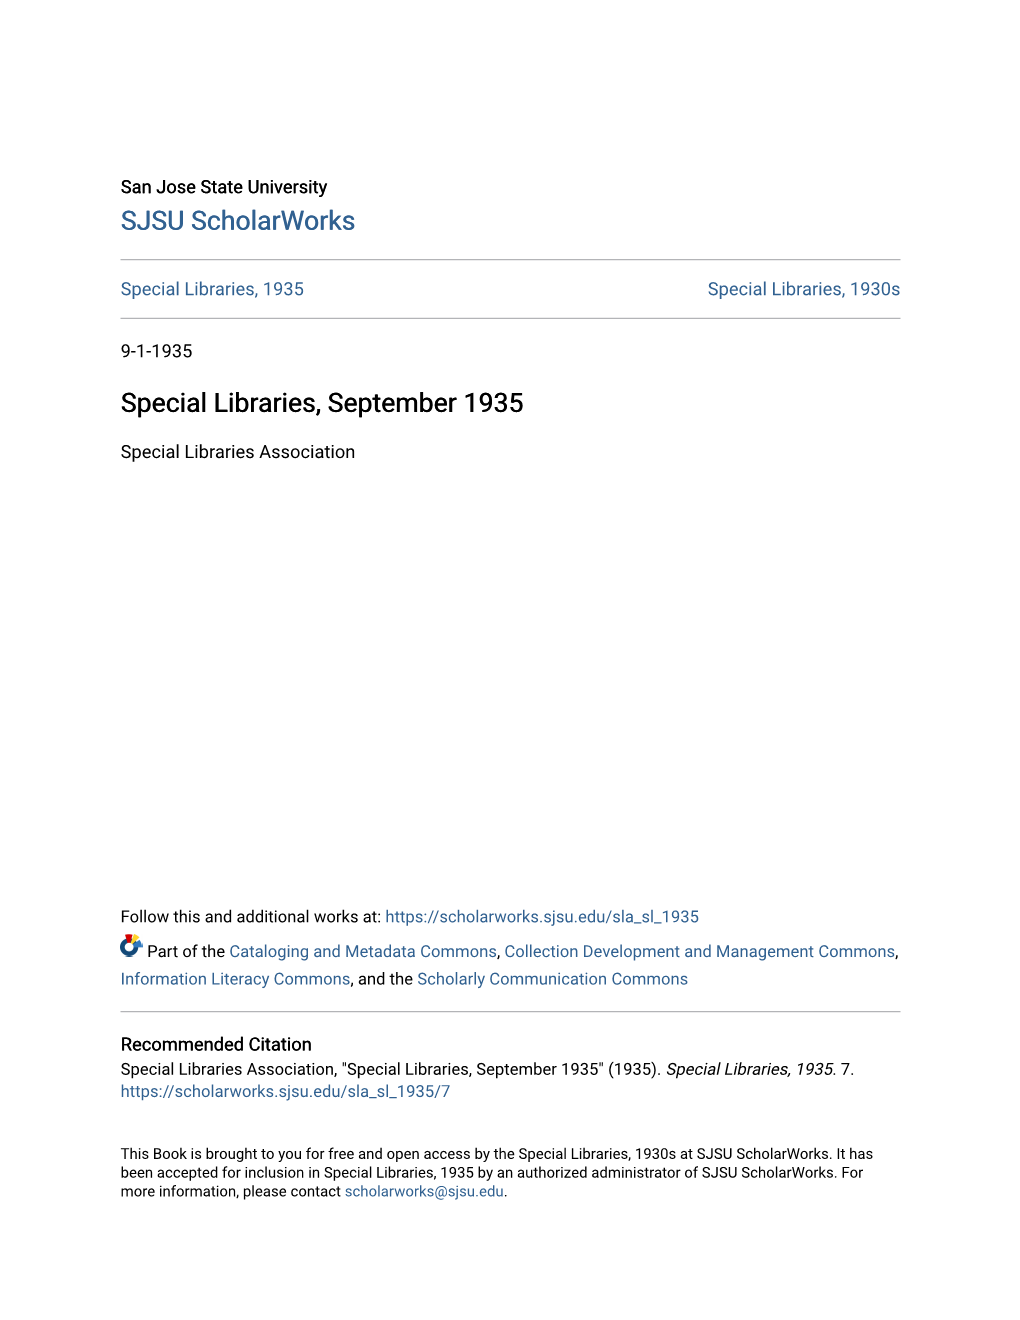 Special Libraries, September 1935